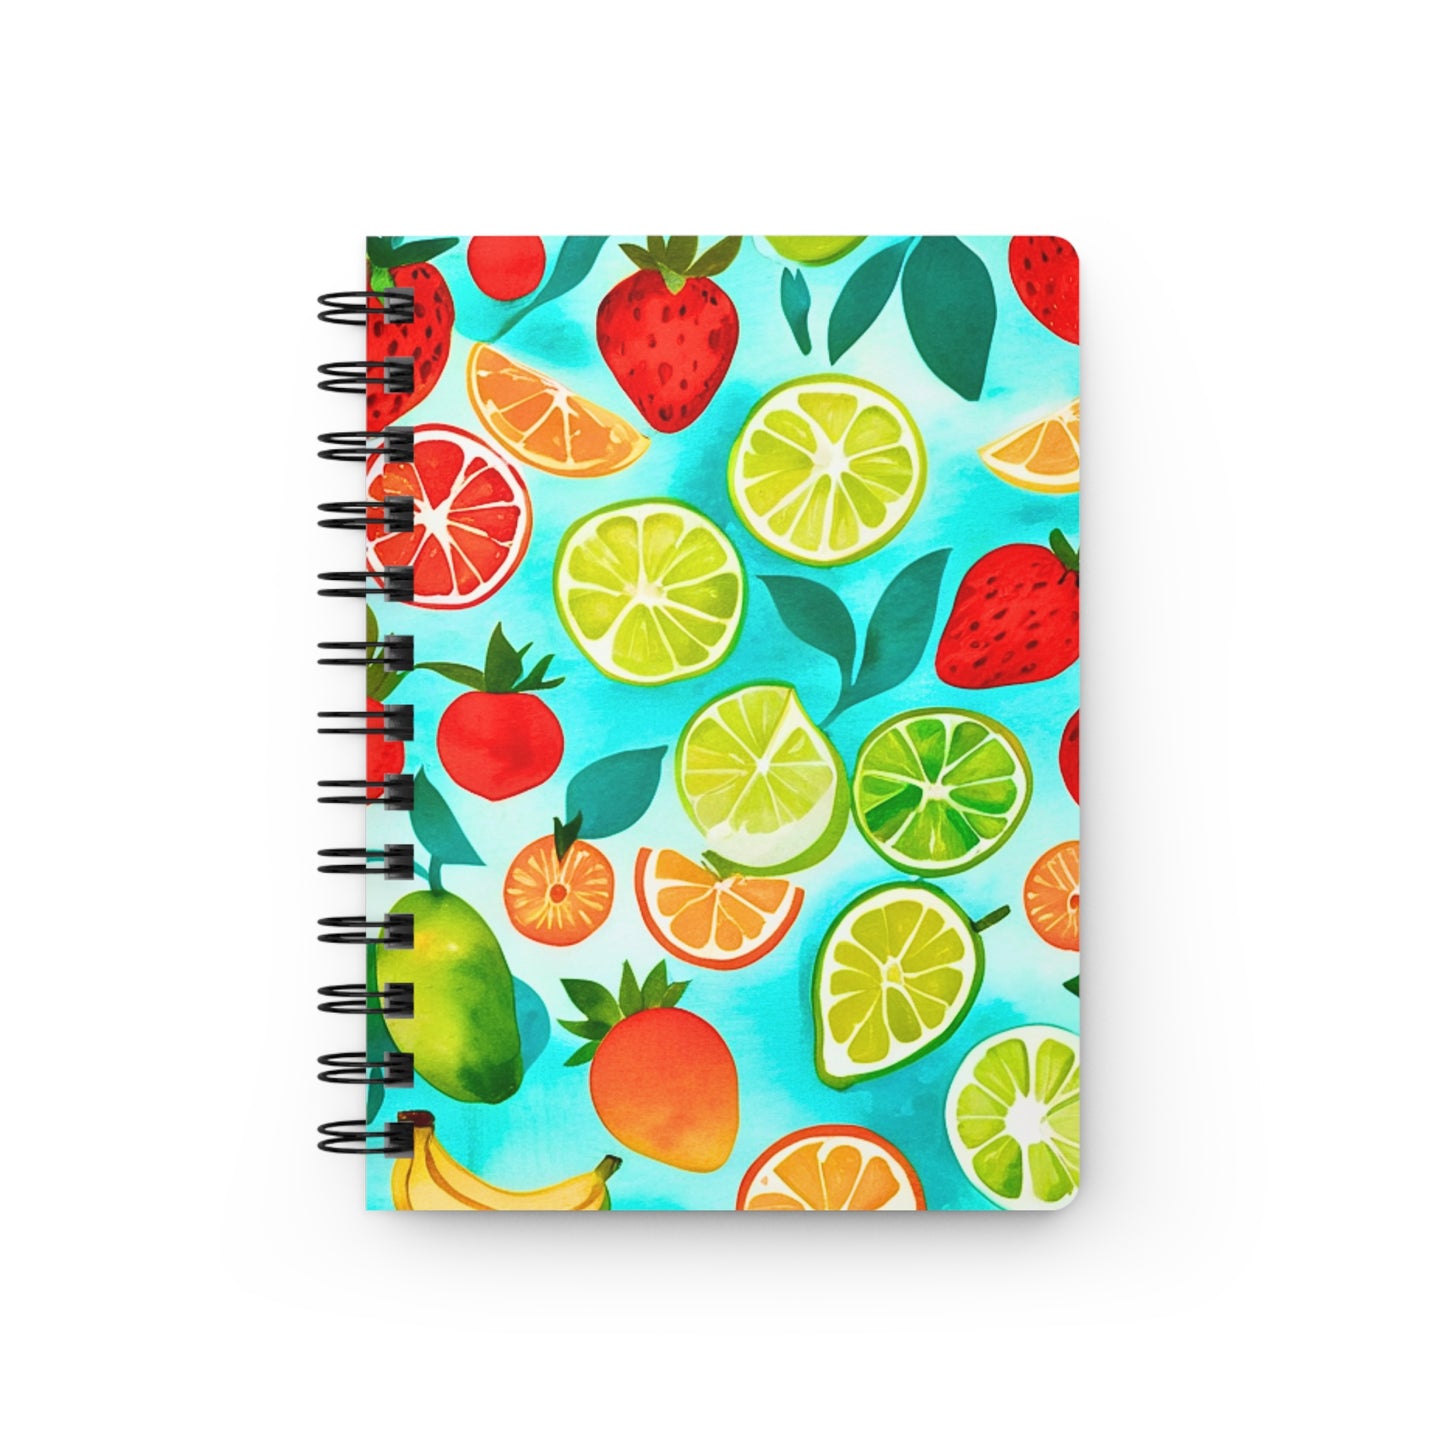 Summer Recipes Planner Watercolor Strawberries Limes Oranges Turquoise Midcentury Modern Writing Spiral Bound Journal